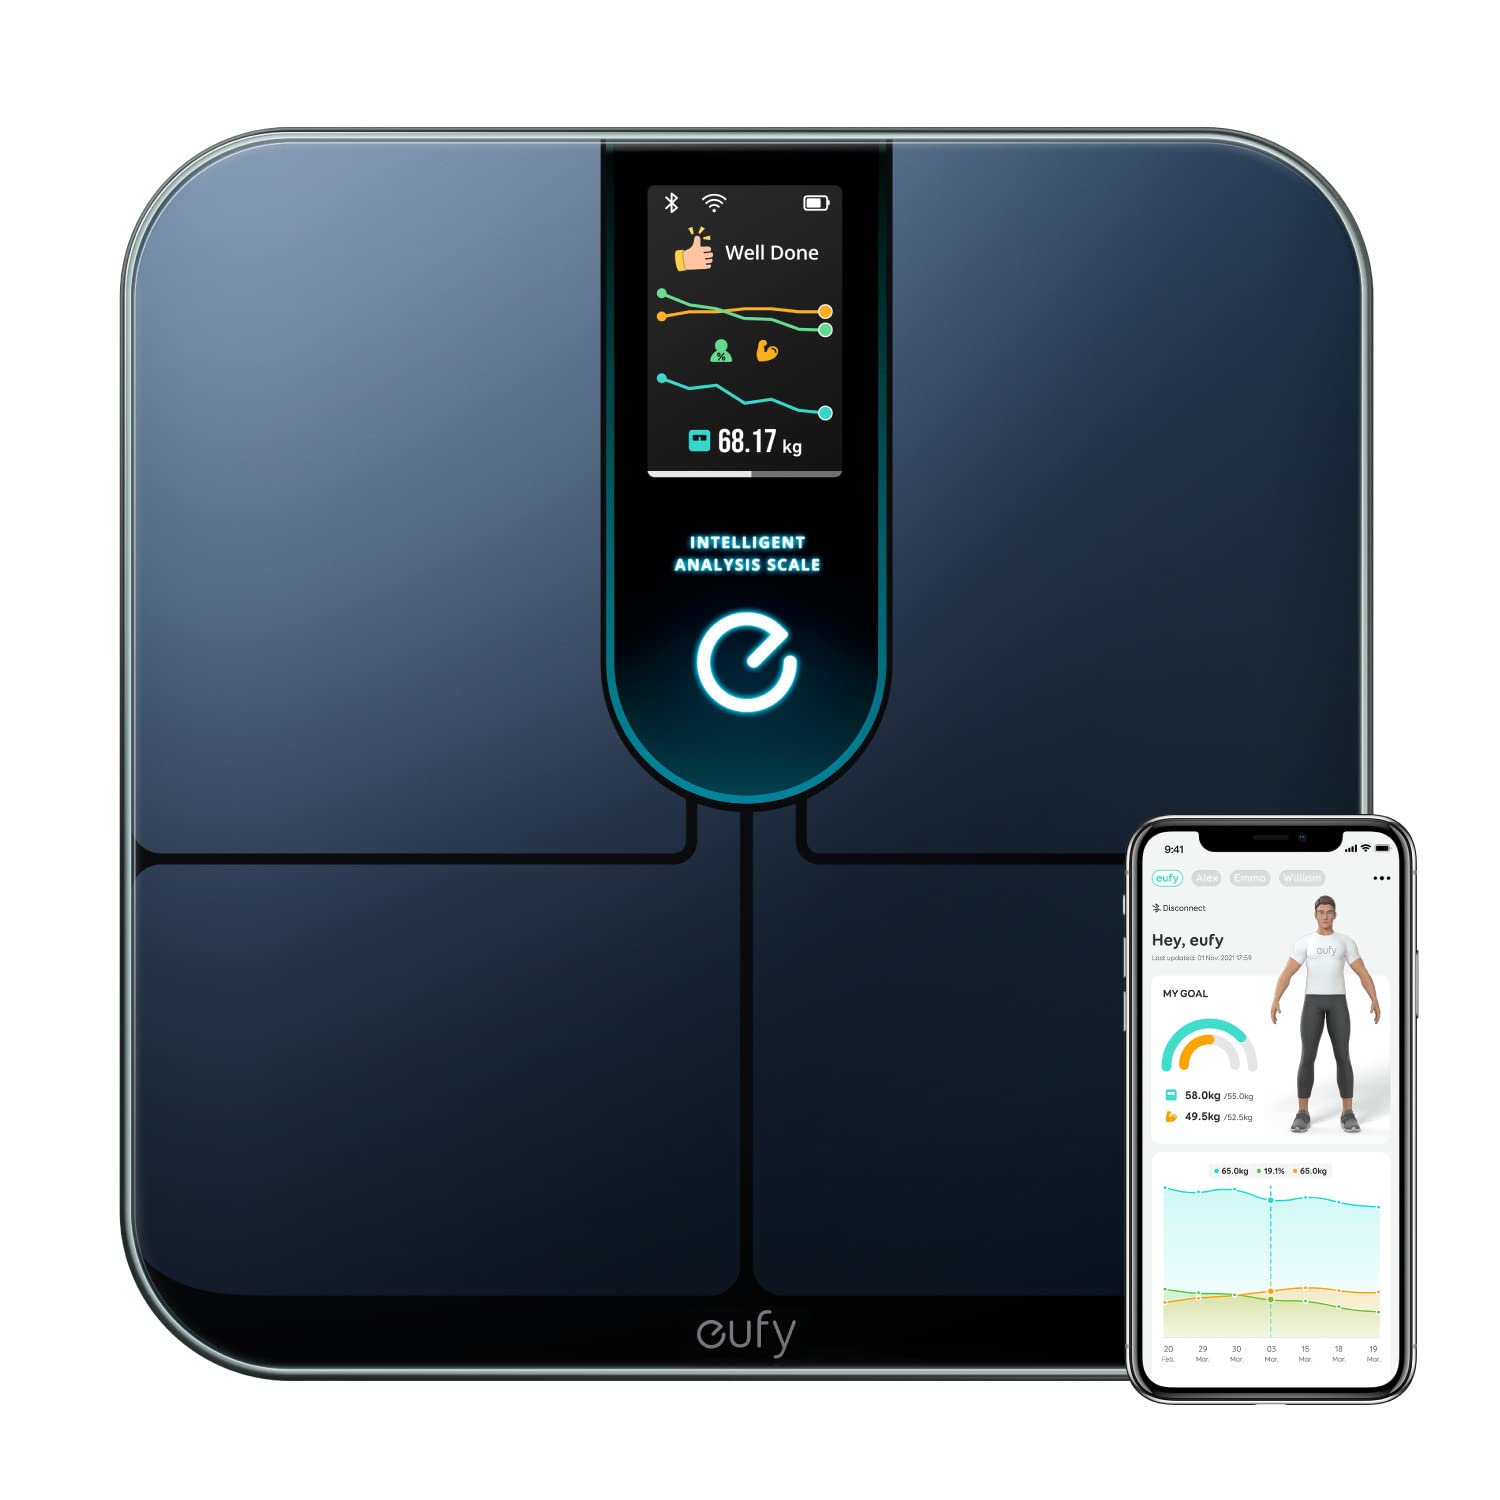 Anker Wi-Fi Fitness Tracking Smart Scale P3 $60 + Free Shipping